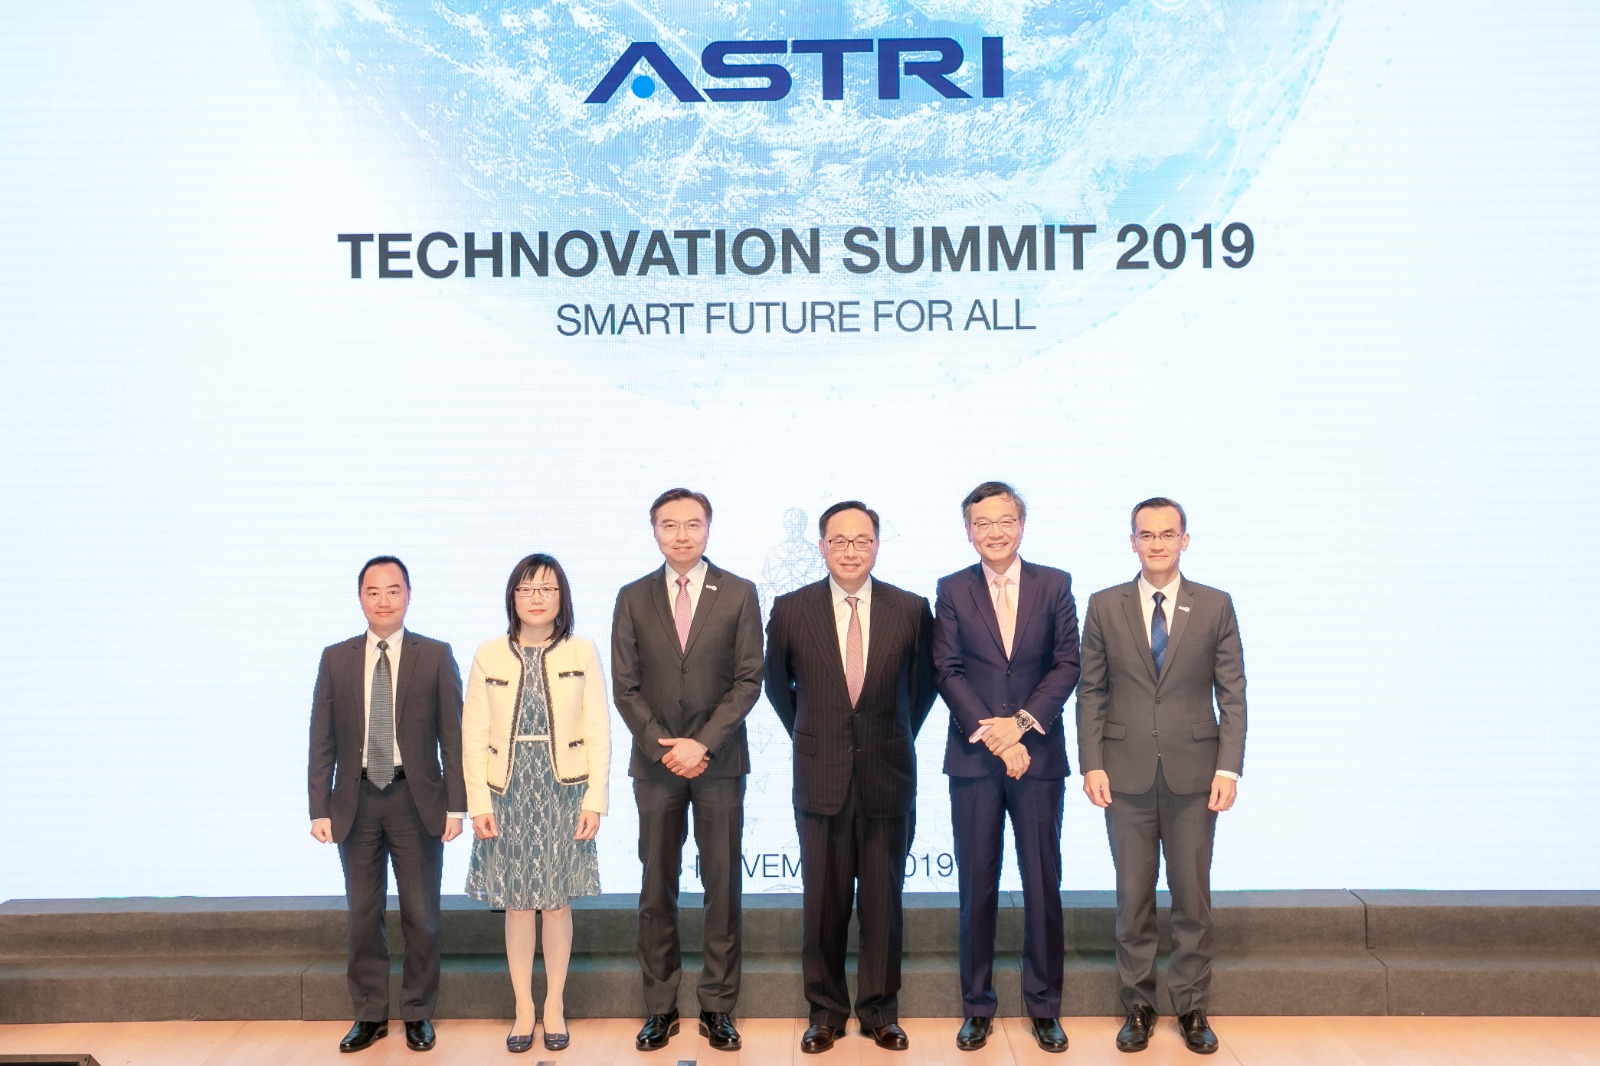 Mr. Tony Wong, Assistant Government Chief Information Officer (Industry Development) (left) in group photo with Mr. Nicholas W Yang, Secretary for Innovation and Technology Bureau (third right), Ms. Rebecca Pun, Commissioner for Innovation and Technology (second left), Mr. Sunny Lee, Chairman, Hong Kong Applied Science and Technology Research Institute (third left), Dr. Lam Ching-choi, Chief Executive Officer, Haven of Hope Christian Service (second right), and Mr. Hugh Chow, Chief Executive Officer, Hong Kong Applied Science and Technology Research Institute (first right) at the “Technovation Summit 2019”.